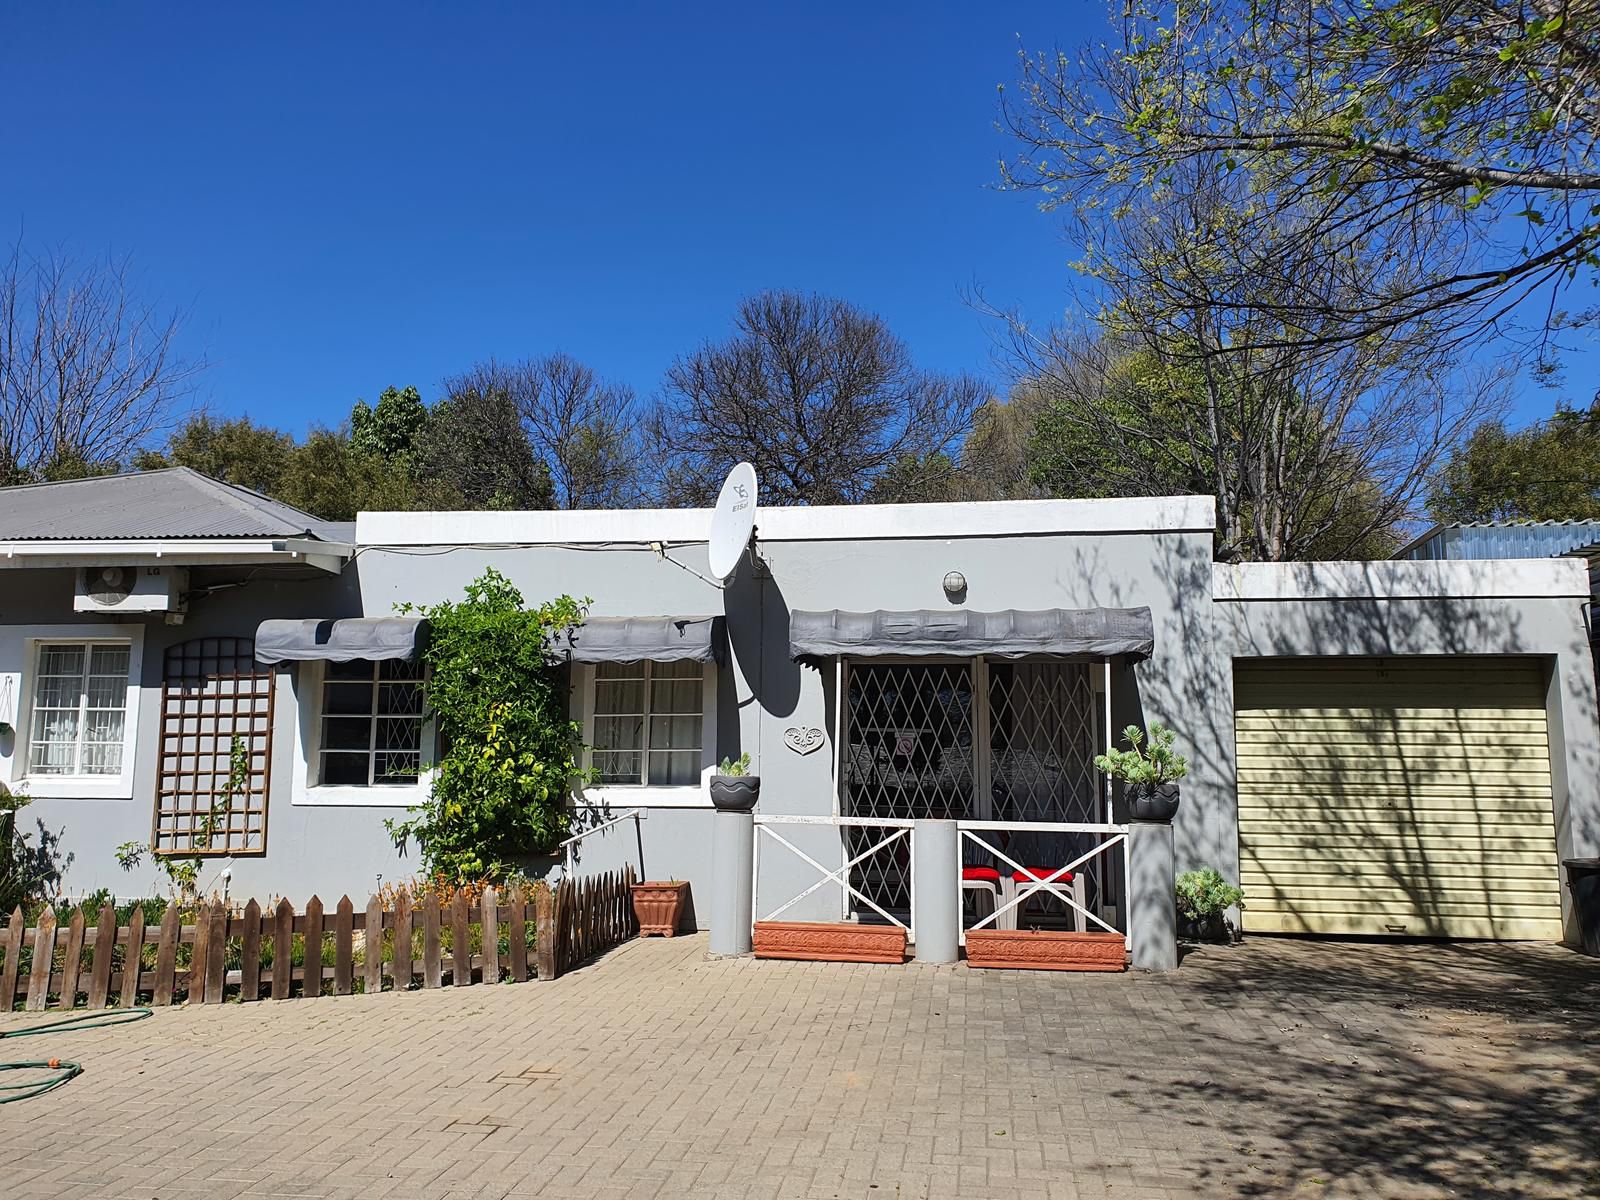 Lizbe Accommodation Waverley Bloemfontein Free State South Africa House, Building, Architecture